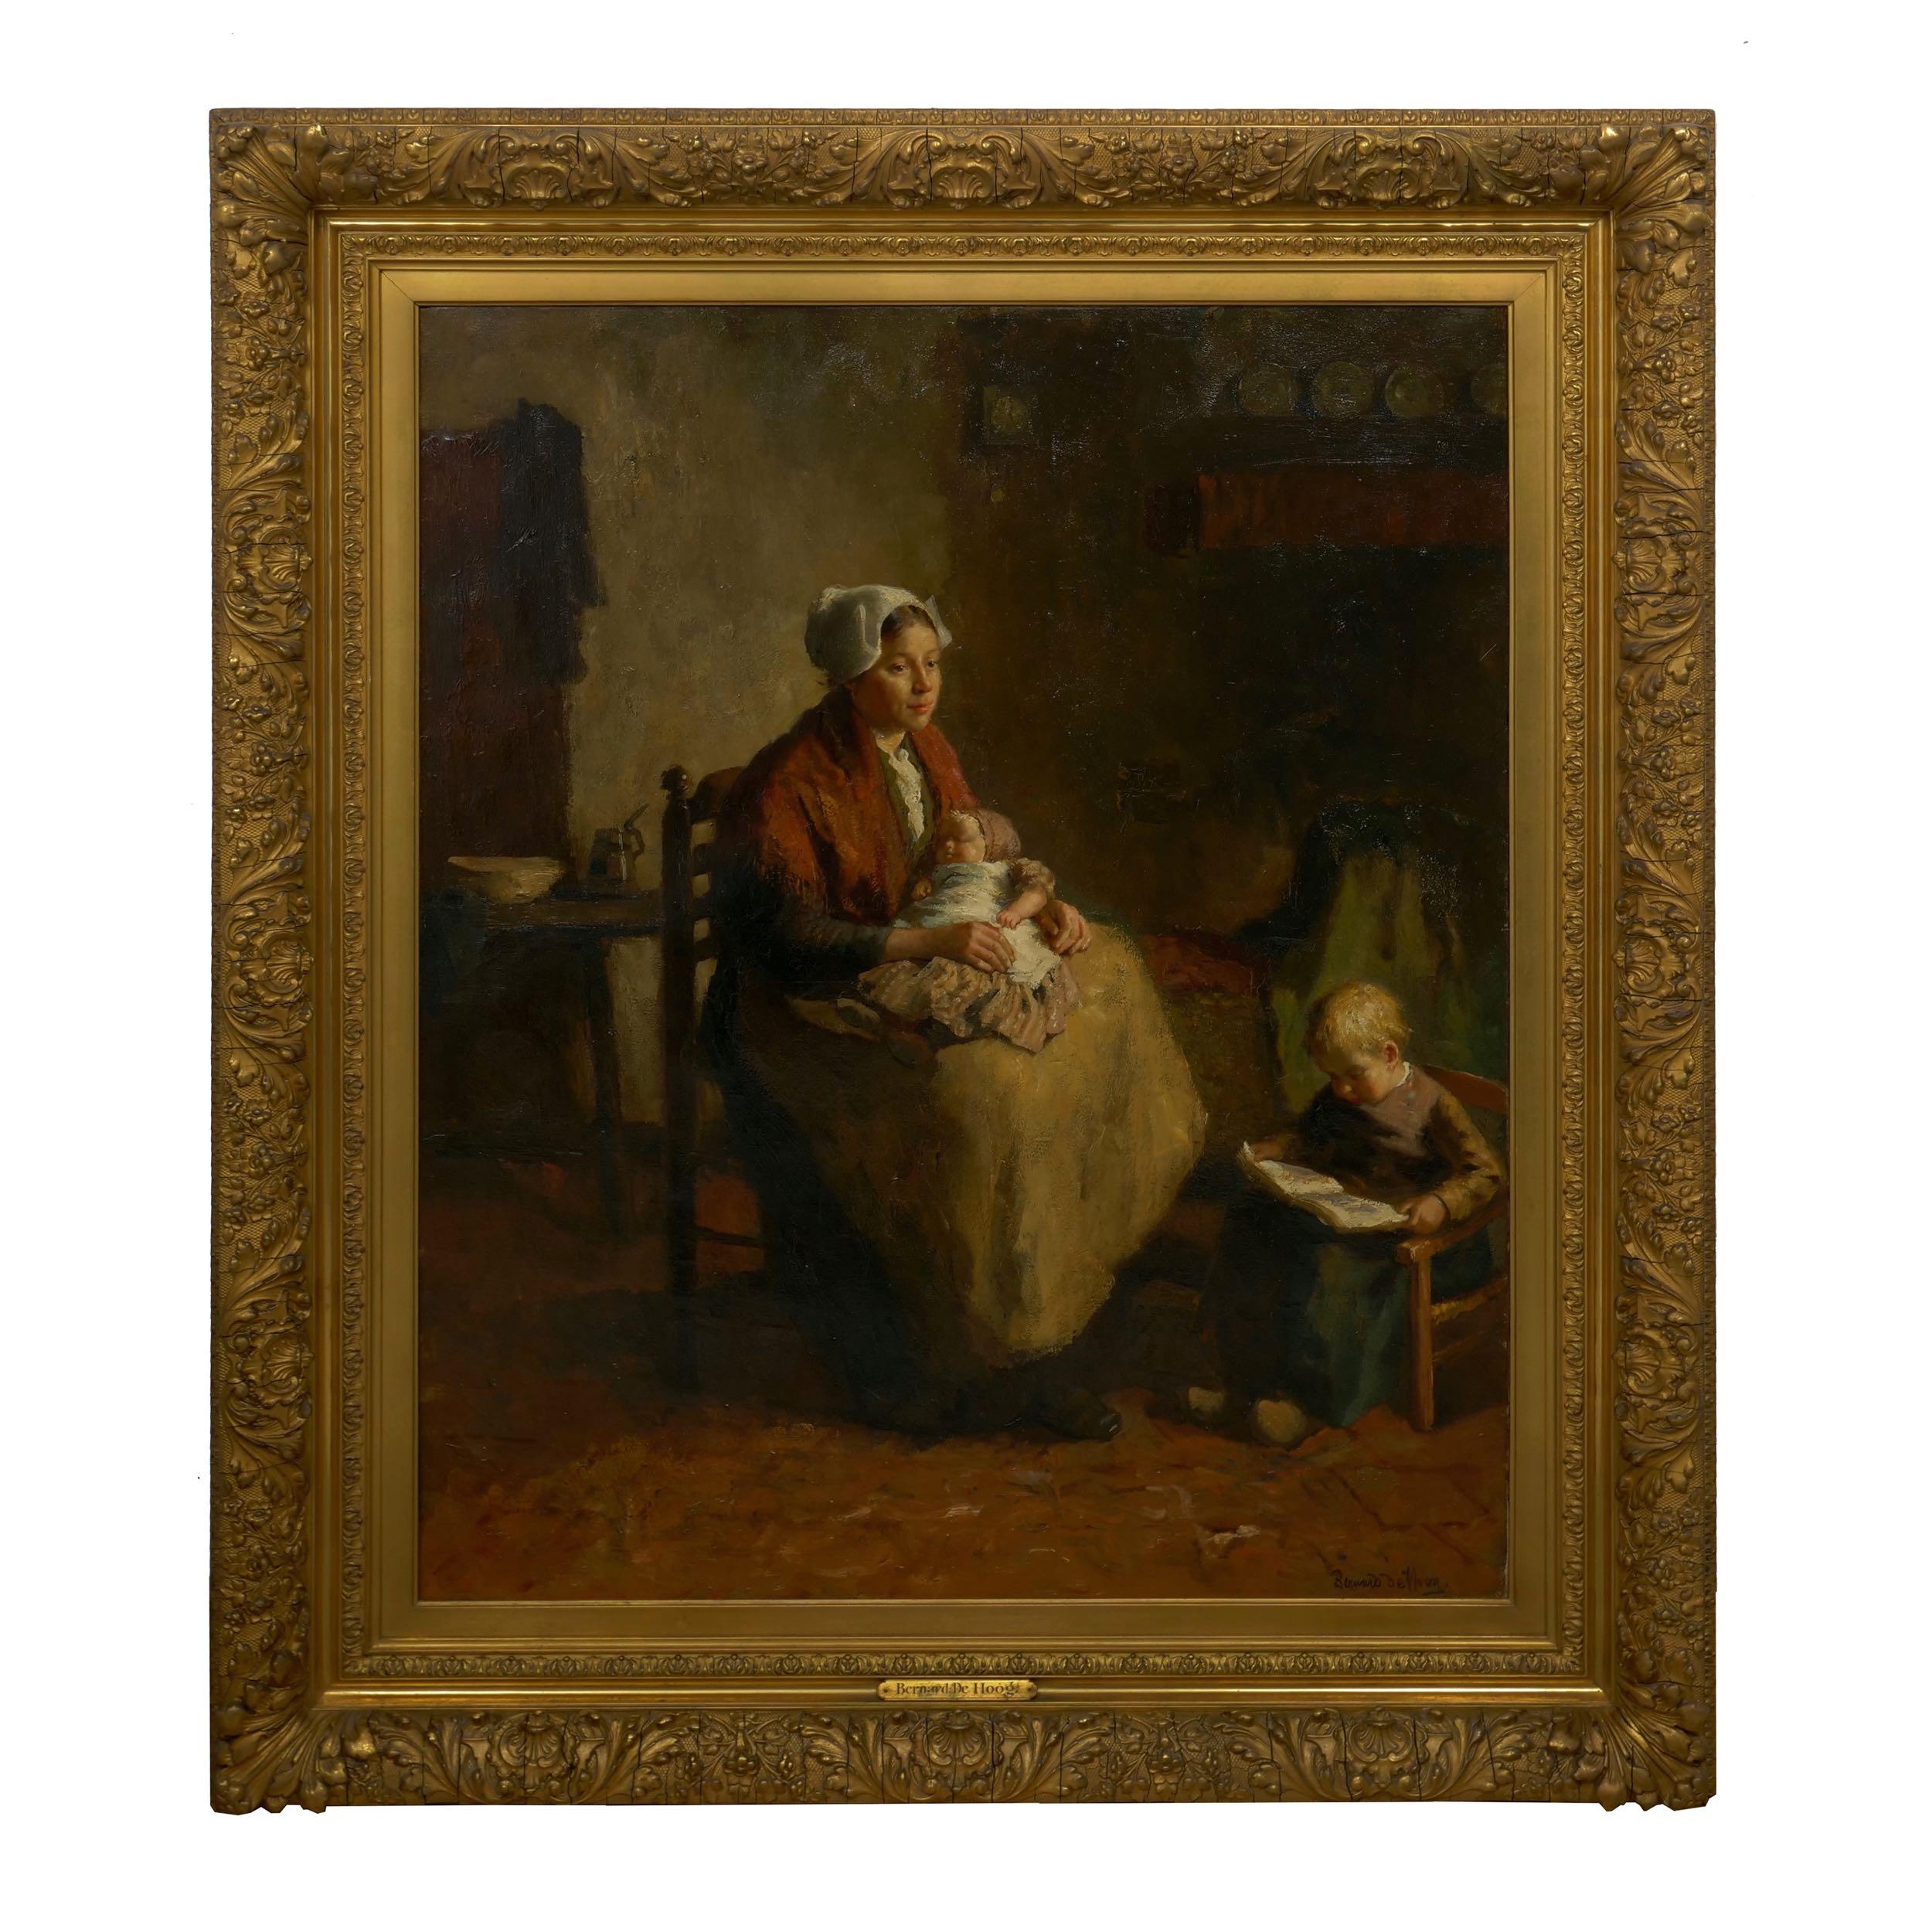 Likely painted in the 1920s, the present work by Bernard de Hoog is not dated but does include a faint stamp on the stretcher verso noting its original retailer: Robert C. Vose. A third-generation art dealer of what is now Vose Galleries, Robert C.